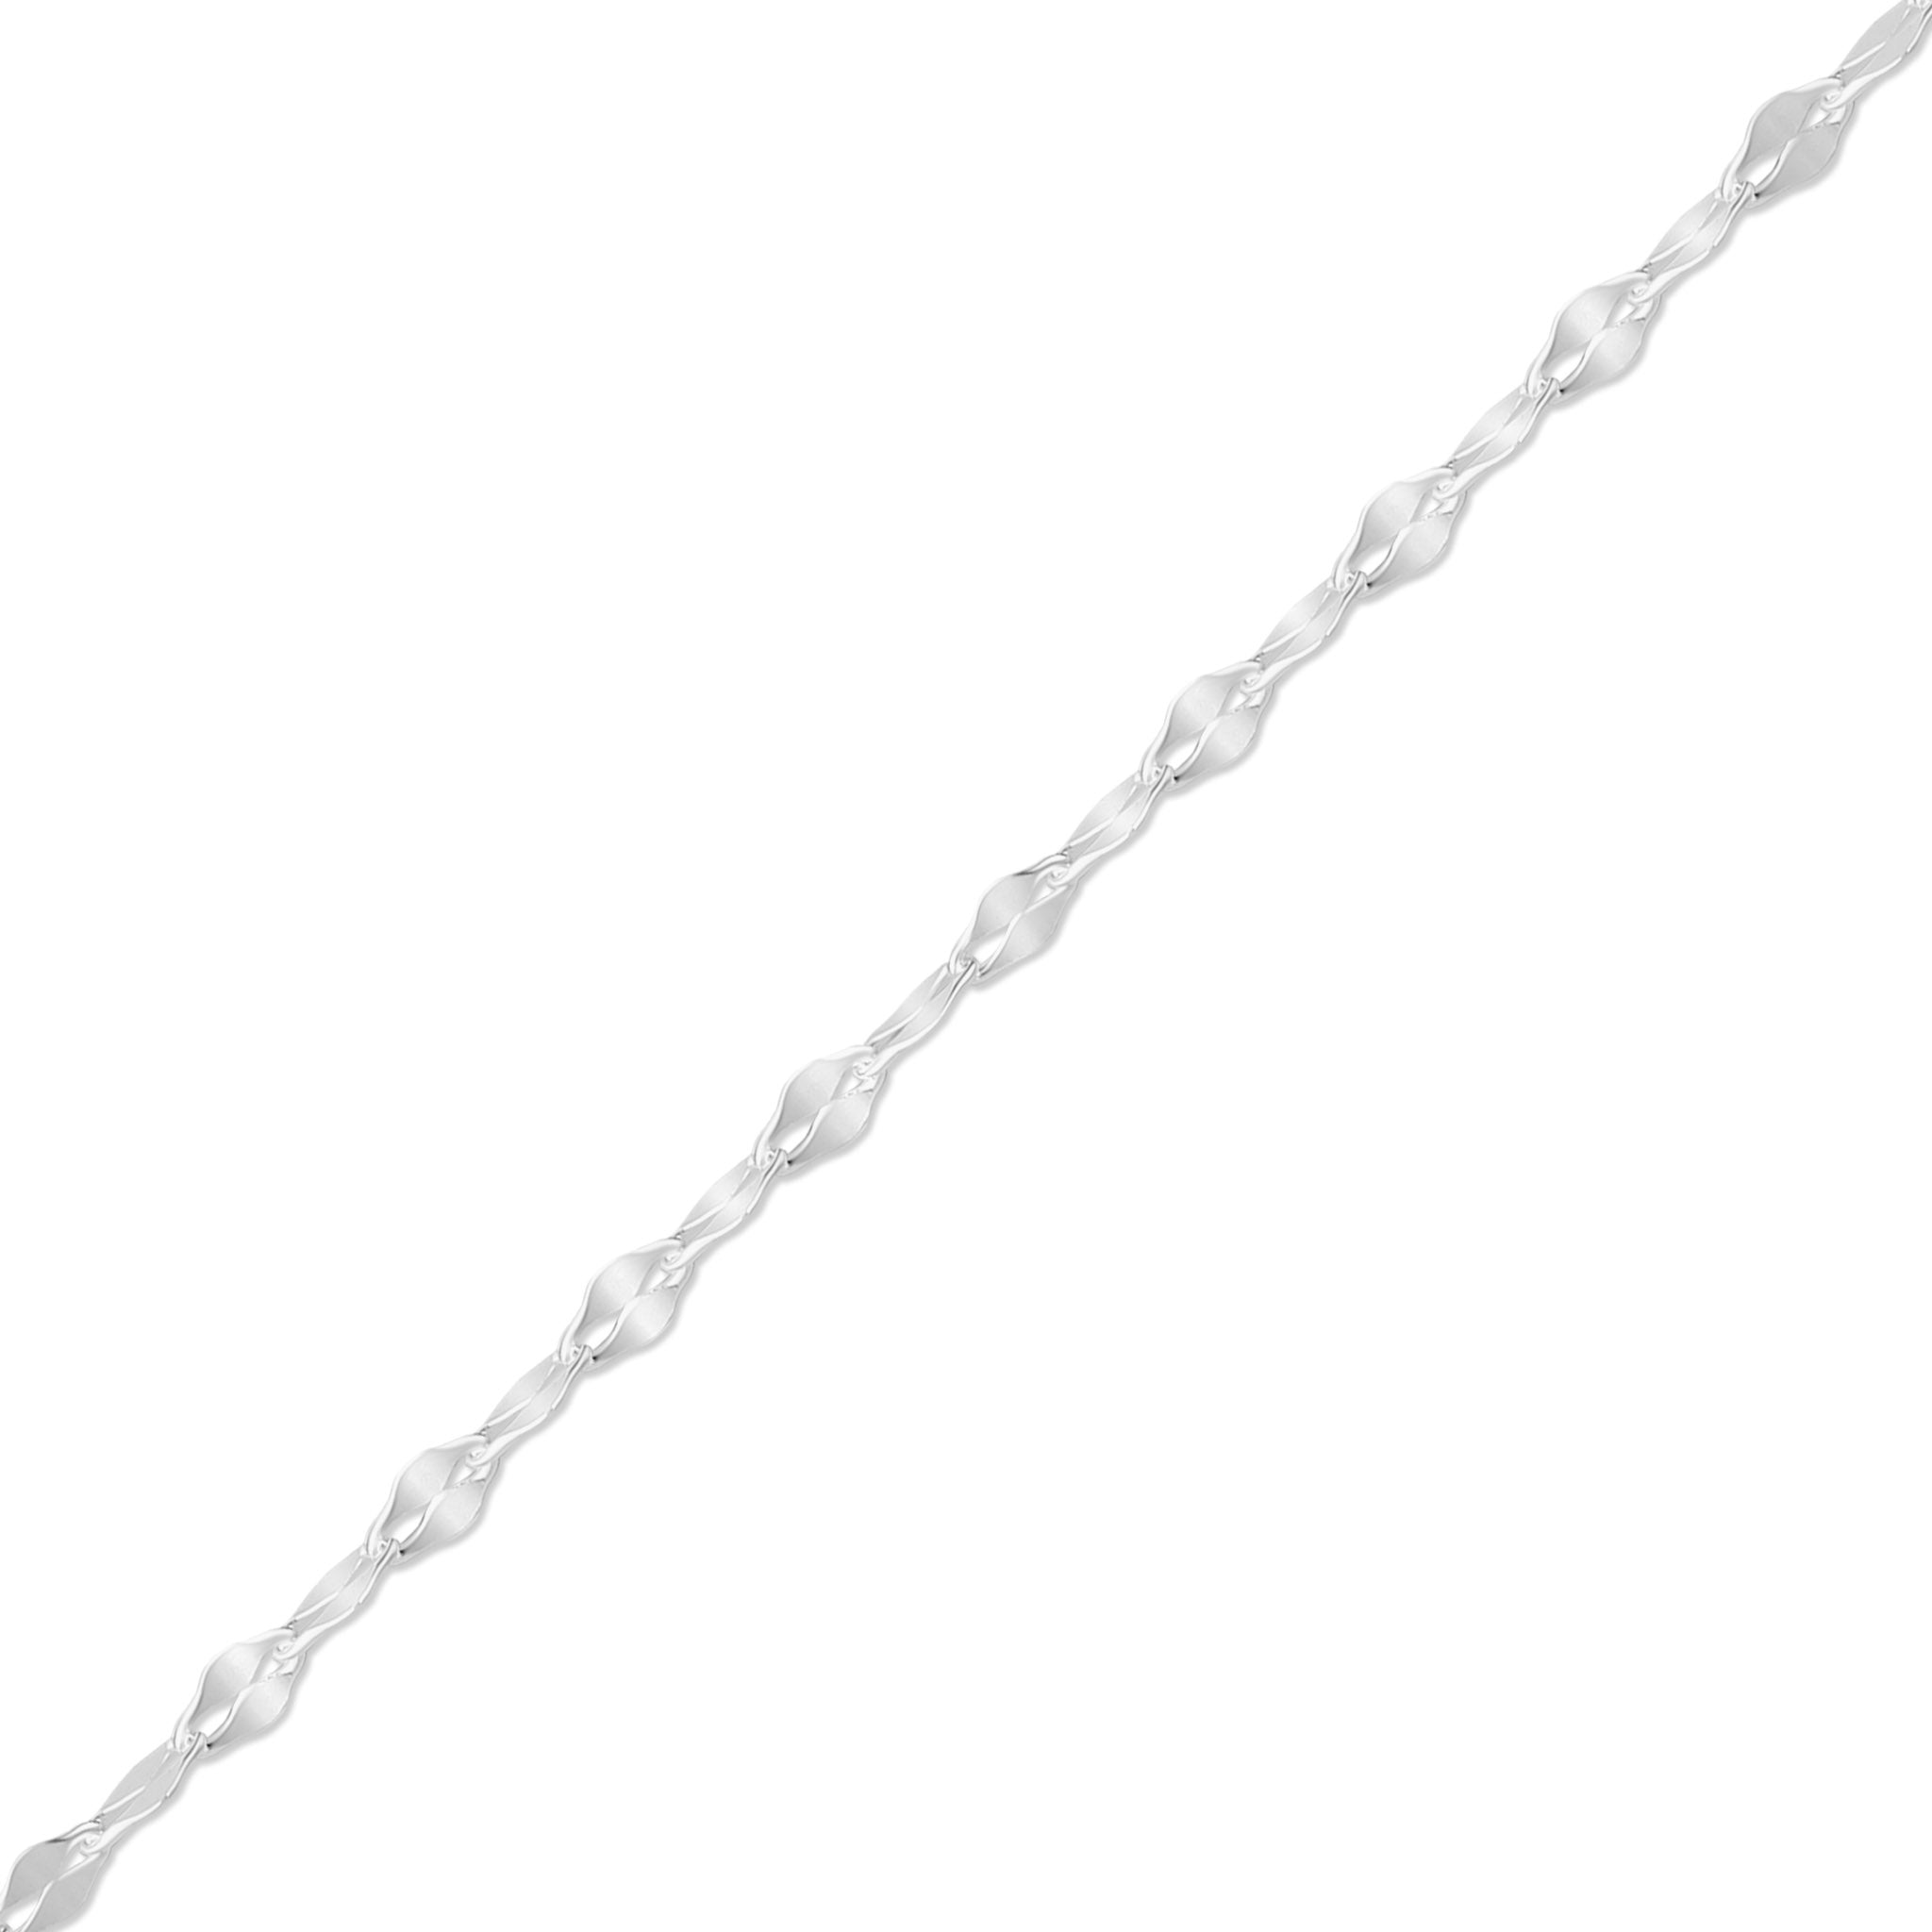 Silver Chain Dropshipping Products, Silver Chain Suppliers with a Lower  Price